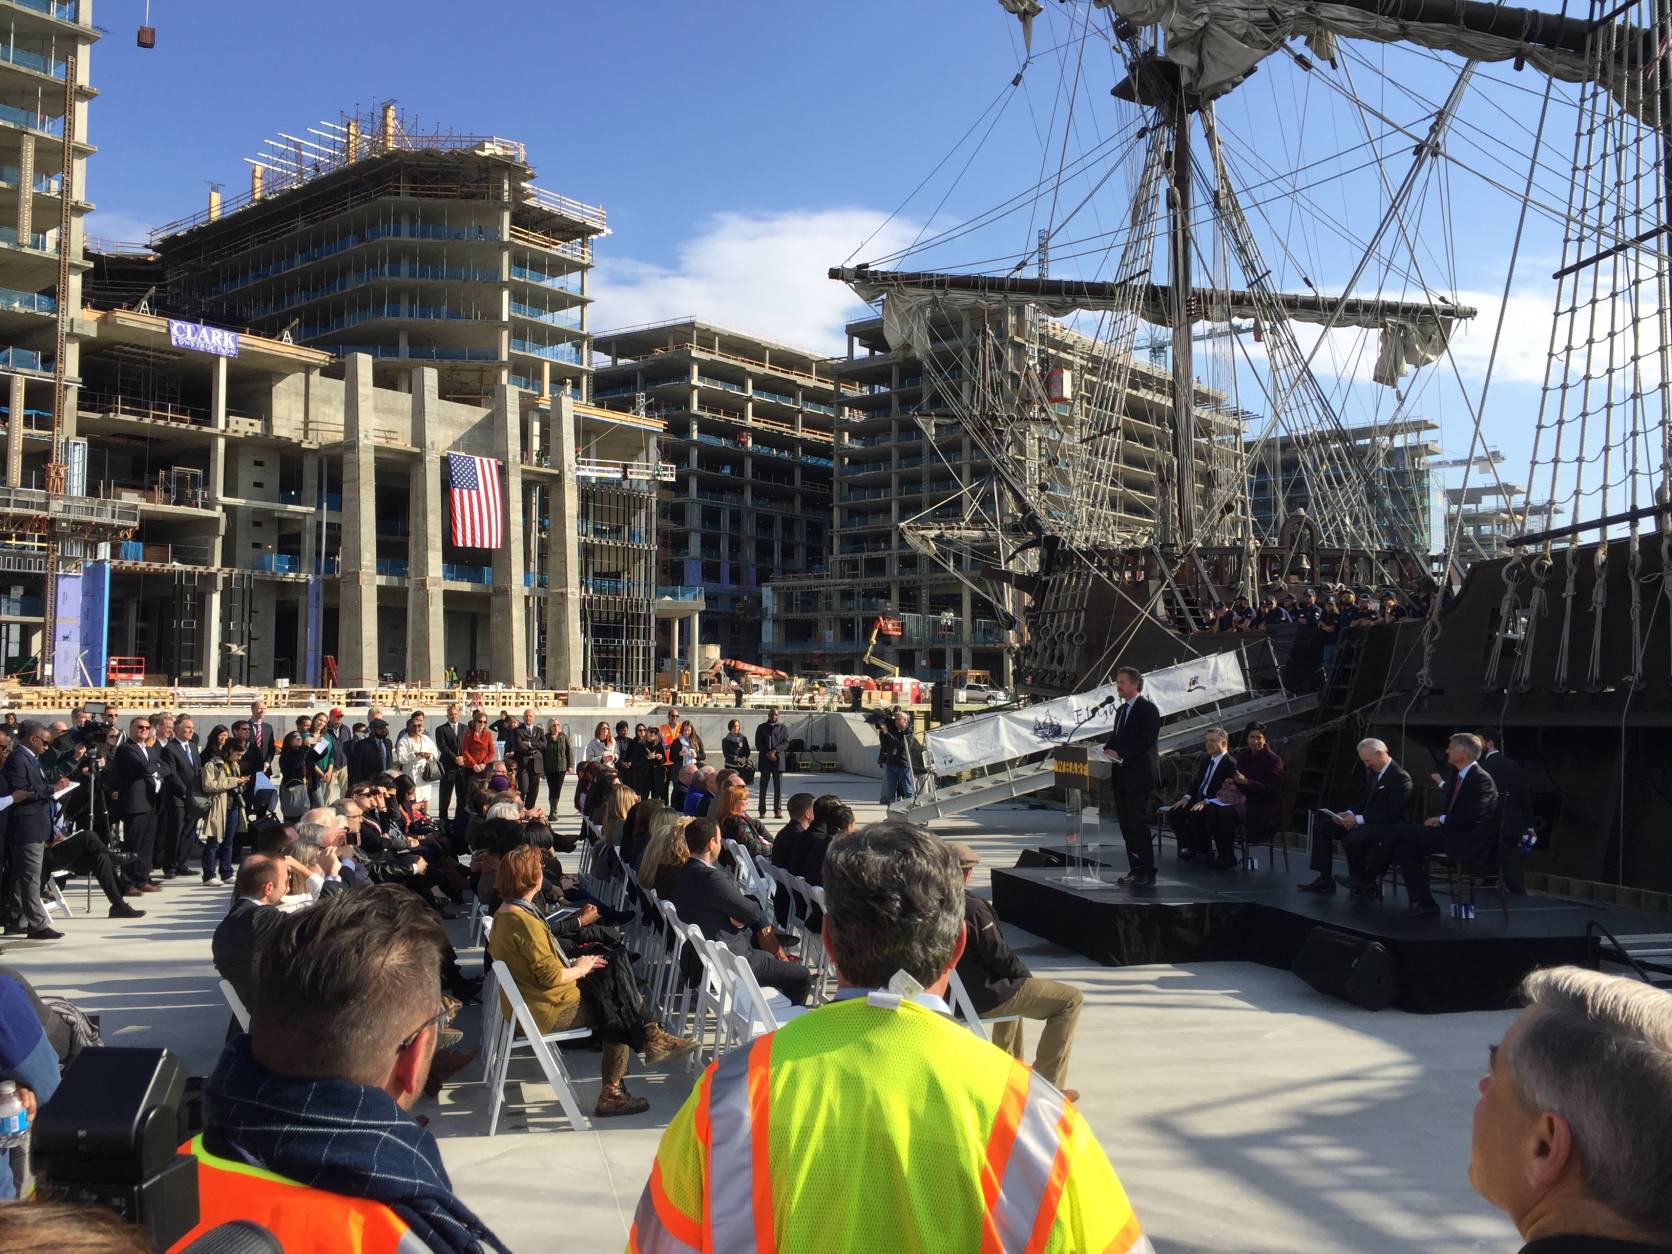 On Oct. 16, officials gather on what's to be D.C.'s new transit pier to announce plans to create a regional water taxi service. Also, the grand opening for the first phase of The Wharf is expected Oct. 12, 2017. (WTOP/Kristi King)